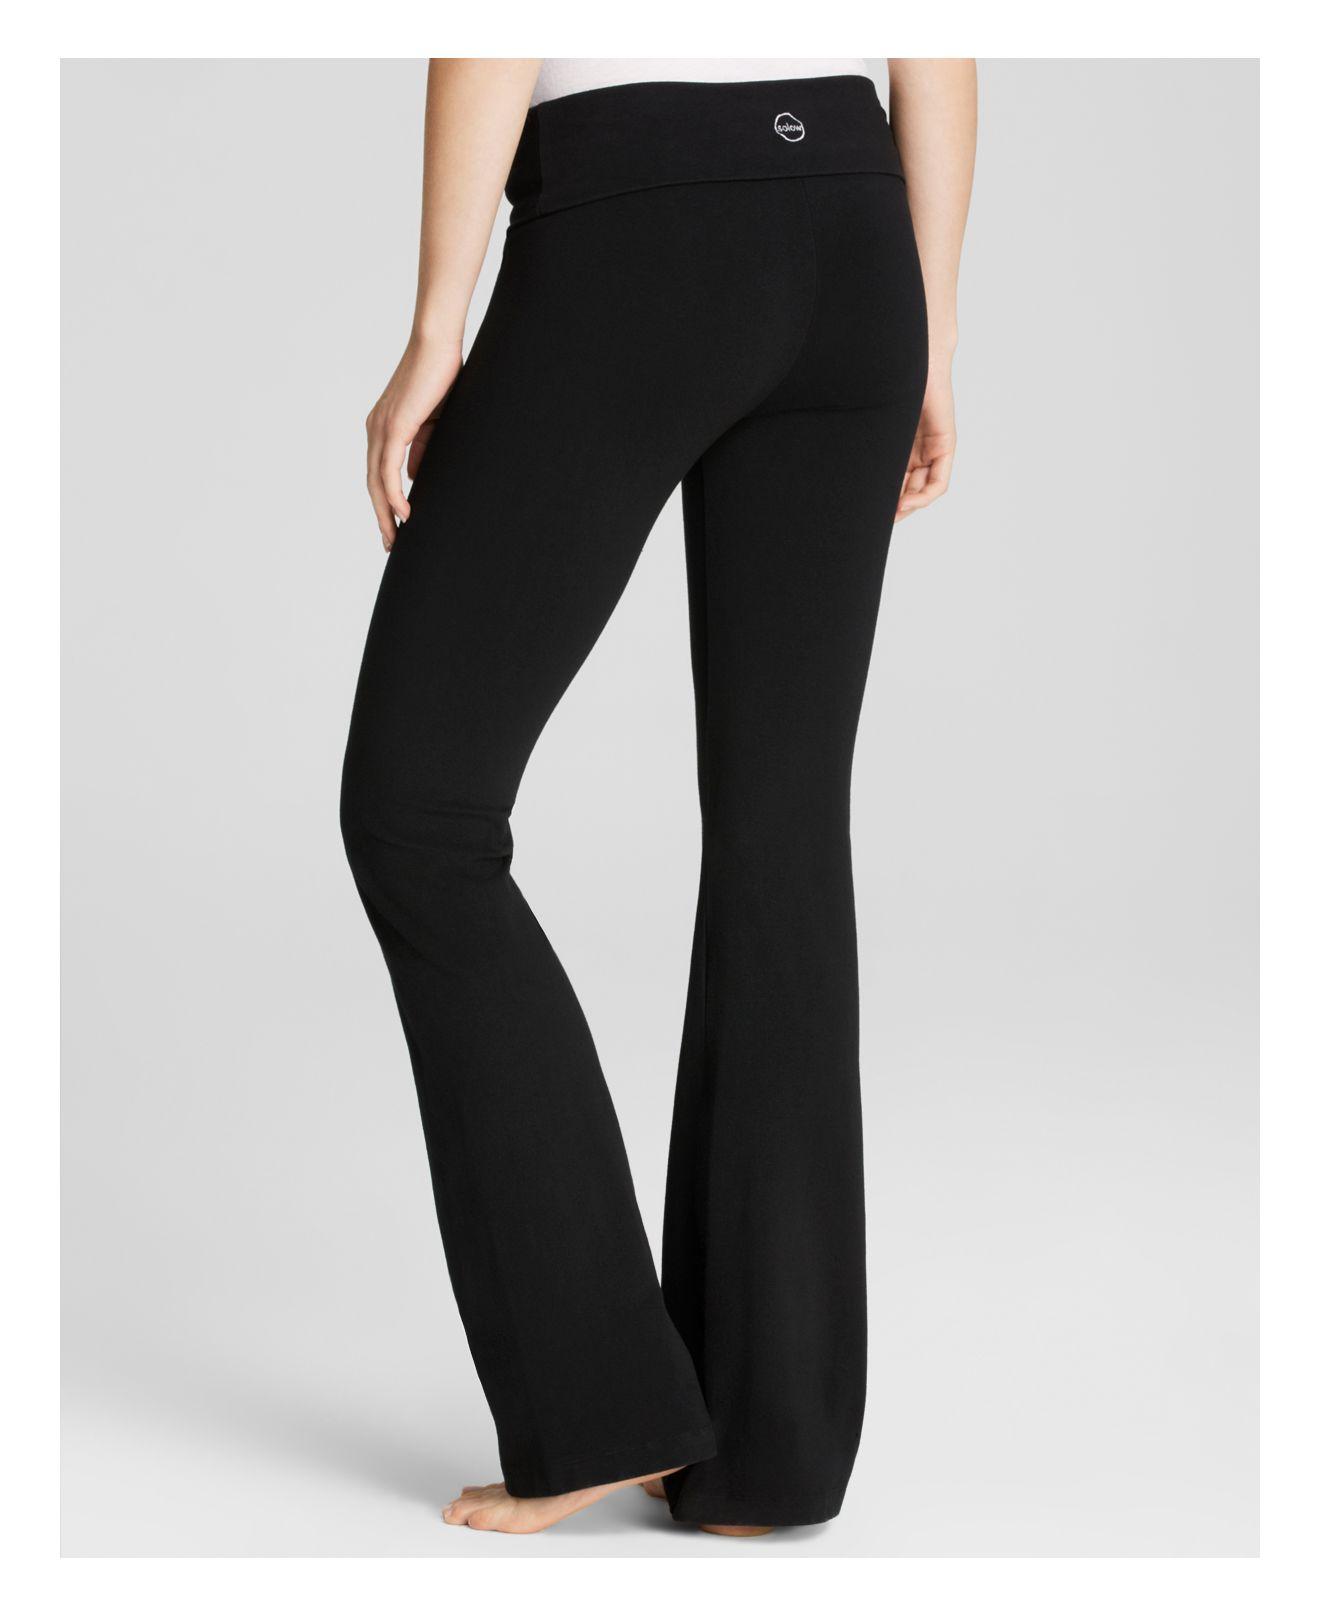 SOLOW Basic Foldover Pants in Black | Lyst